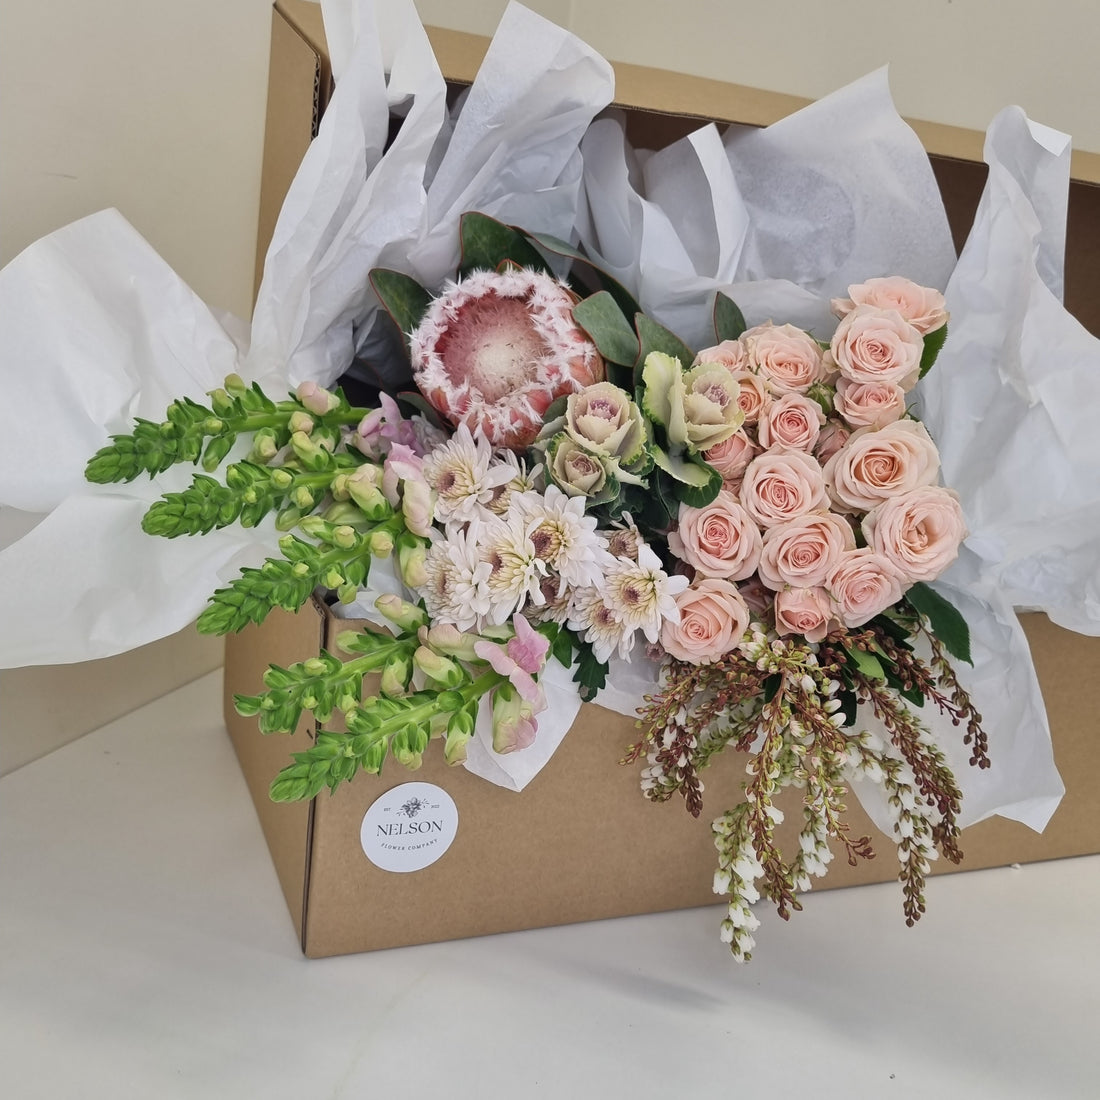 Soft & Sweet Fresh Flower Box, with greenery in a cardboard box with white tissue paper.